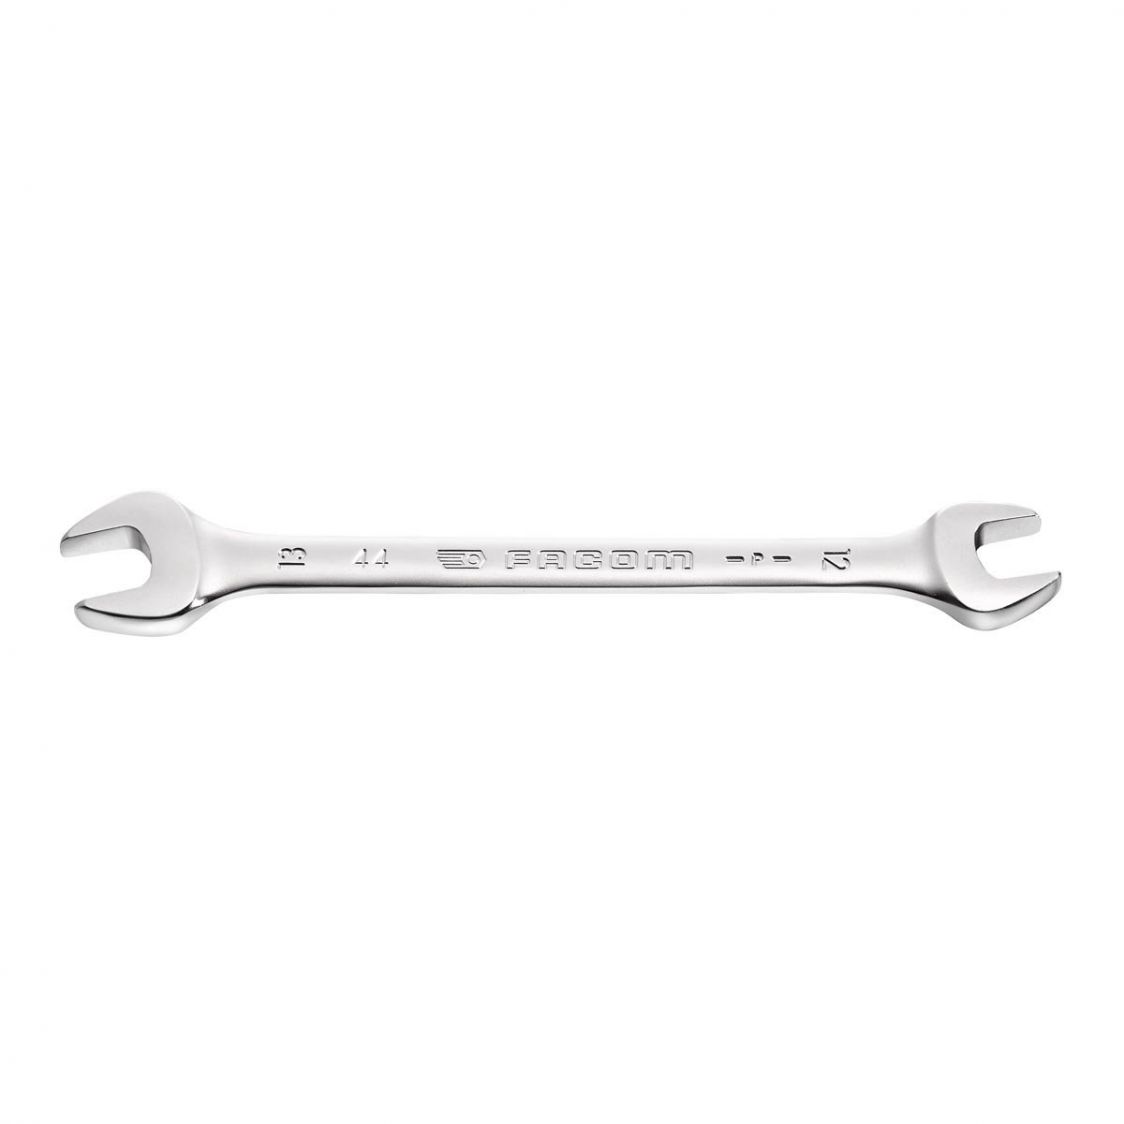 FACOM 44.6X7 - 6x7mm Metric Open Jaw Spanner